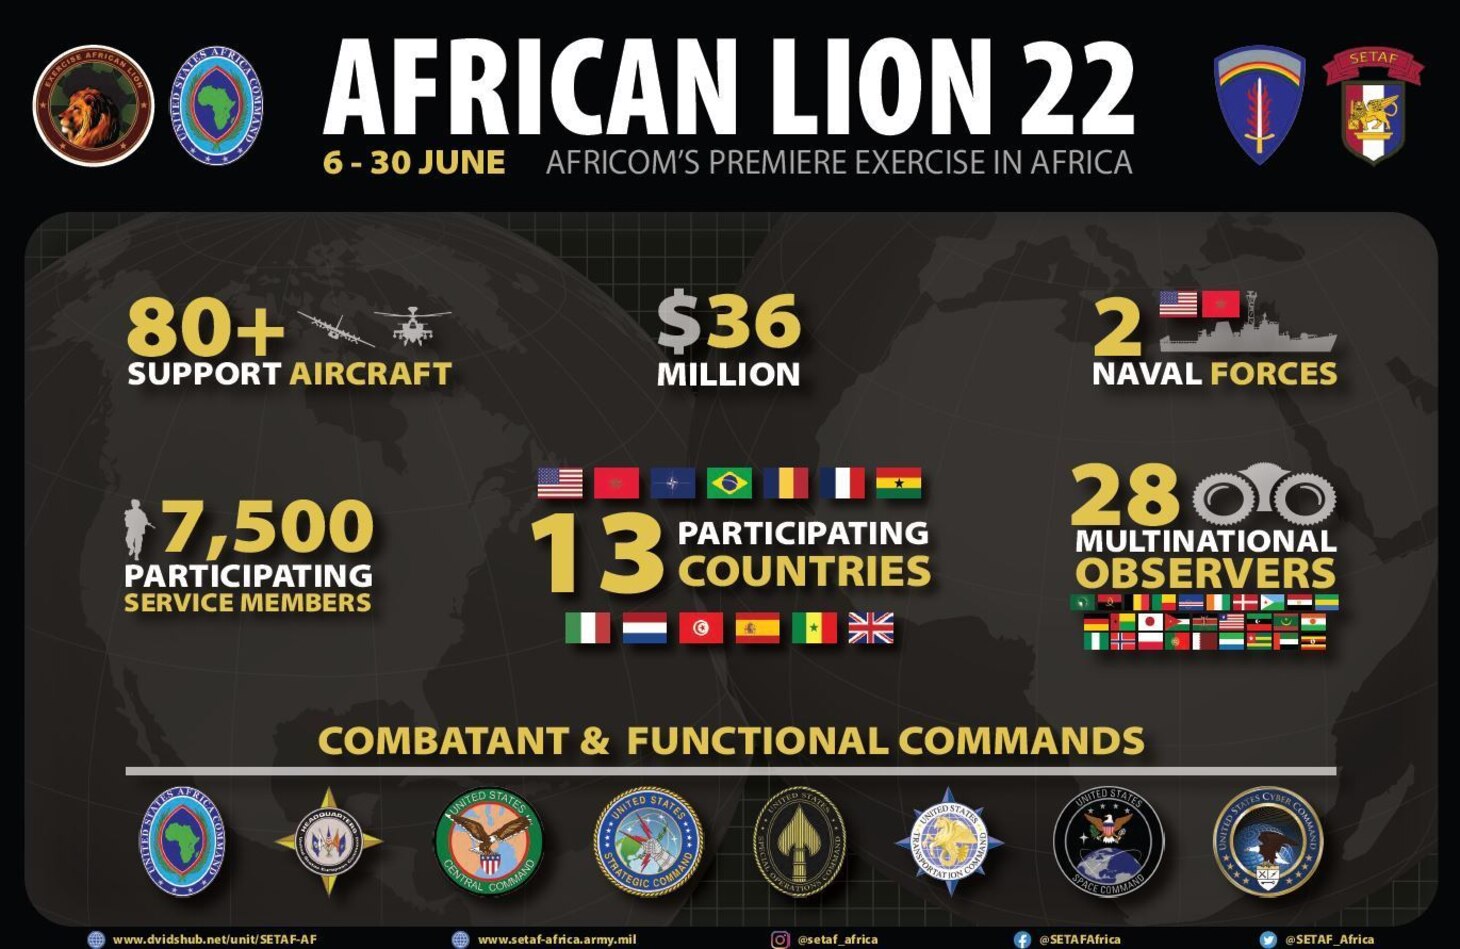 African Lion is U.S. Africa Command’s largest and premier annual exercise, involving more than 7,500 service members from June 6 - 30.